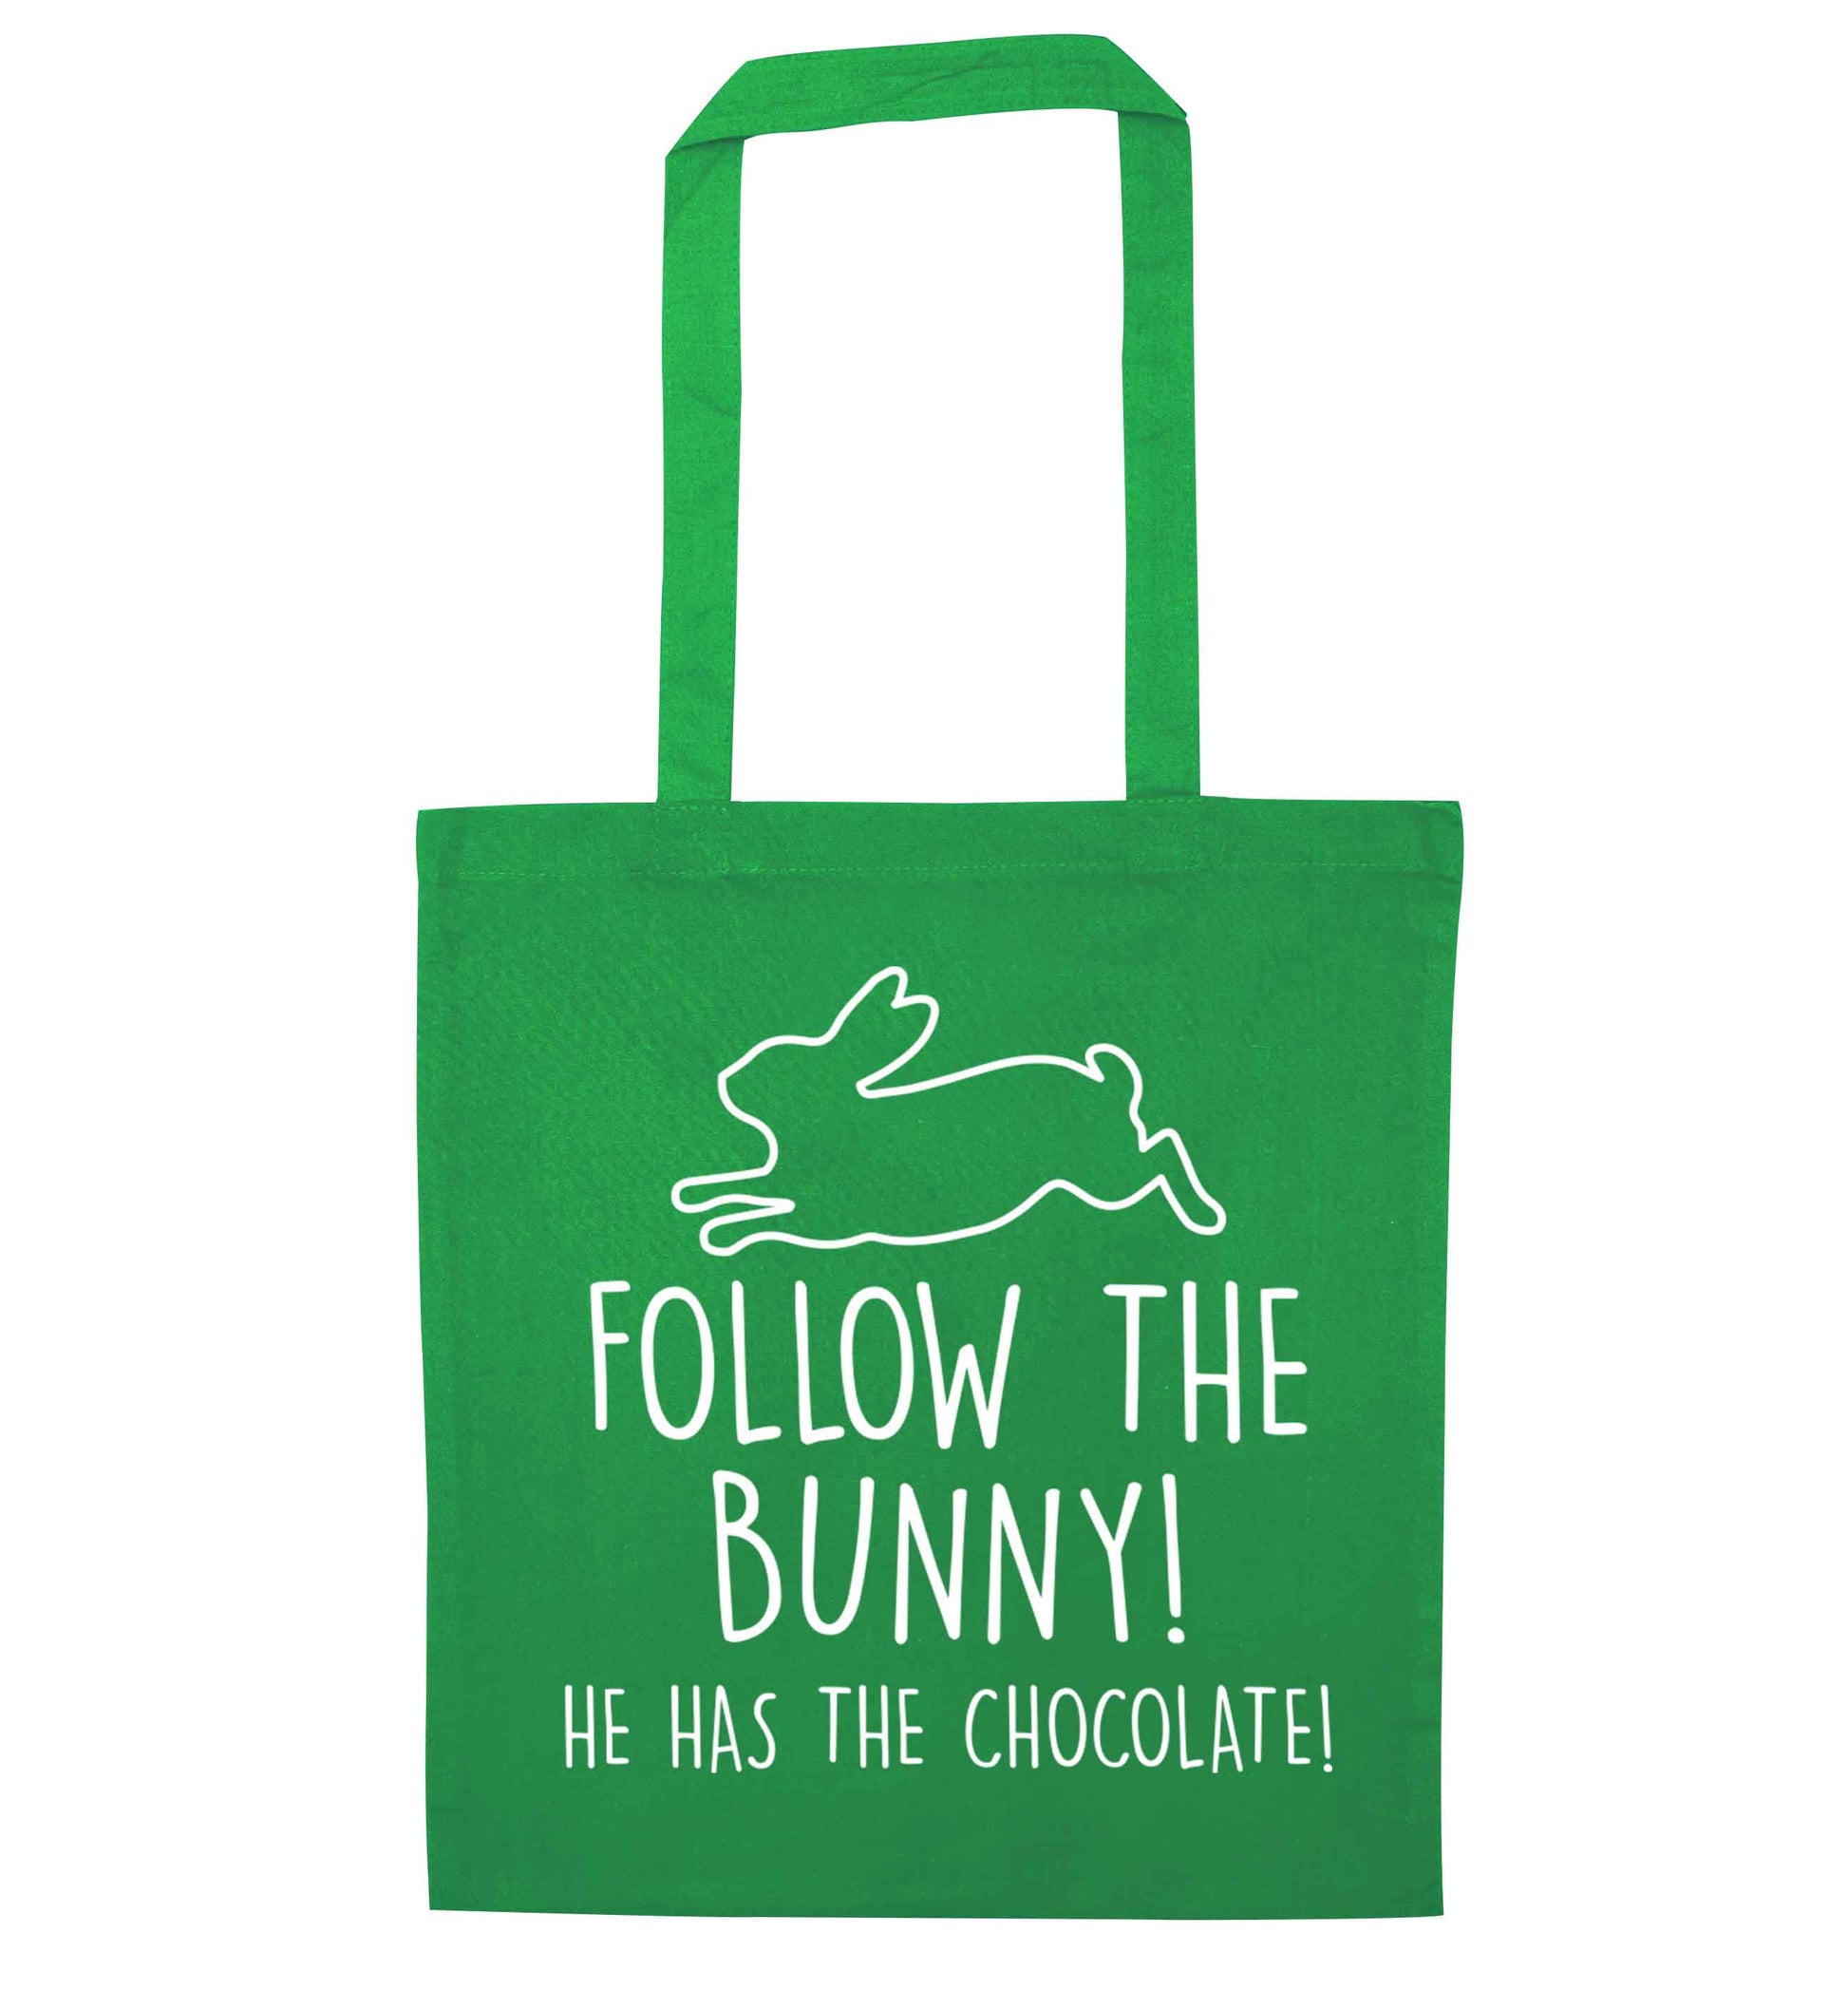 Follow the bunny! He has the chocolate green tote bag